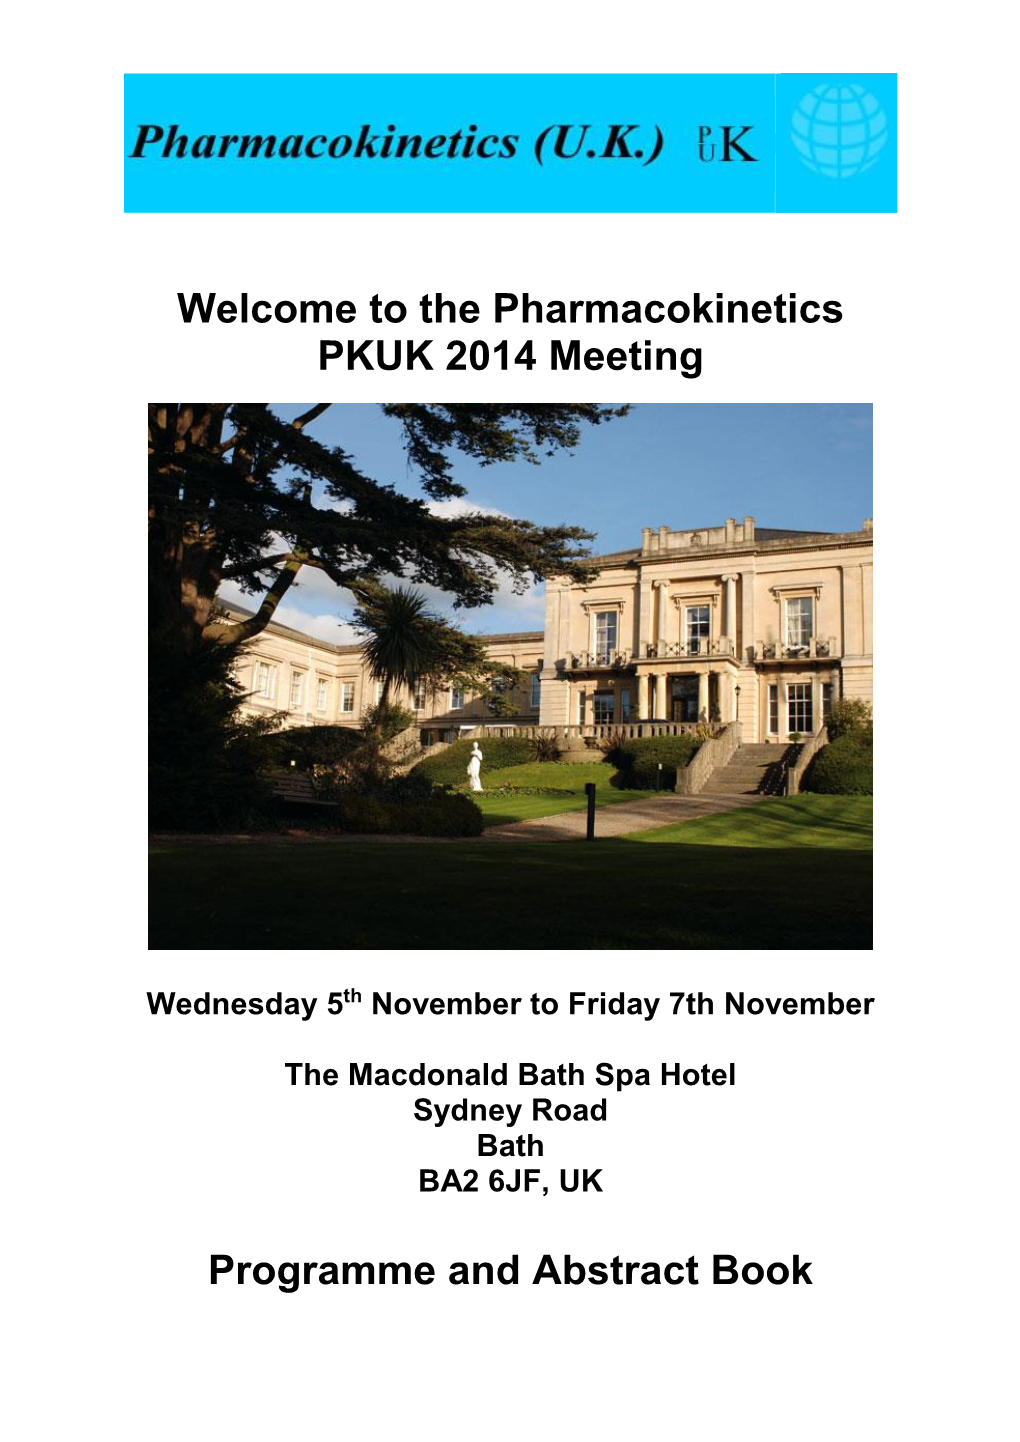 The Pharmacokinetics PKUK 2014 Meeting Programme and Abstract